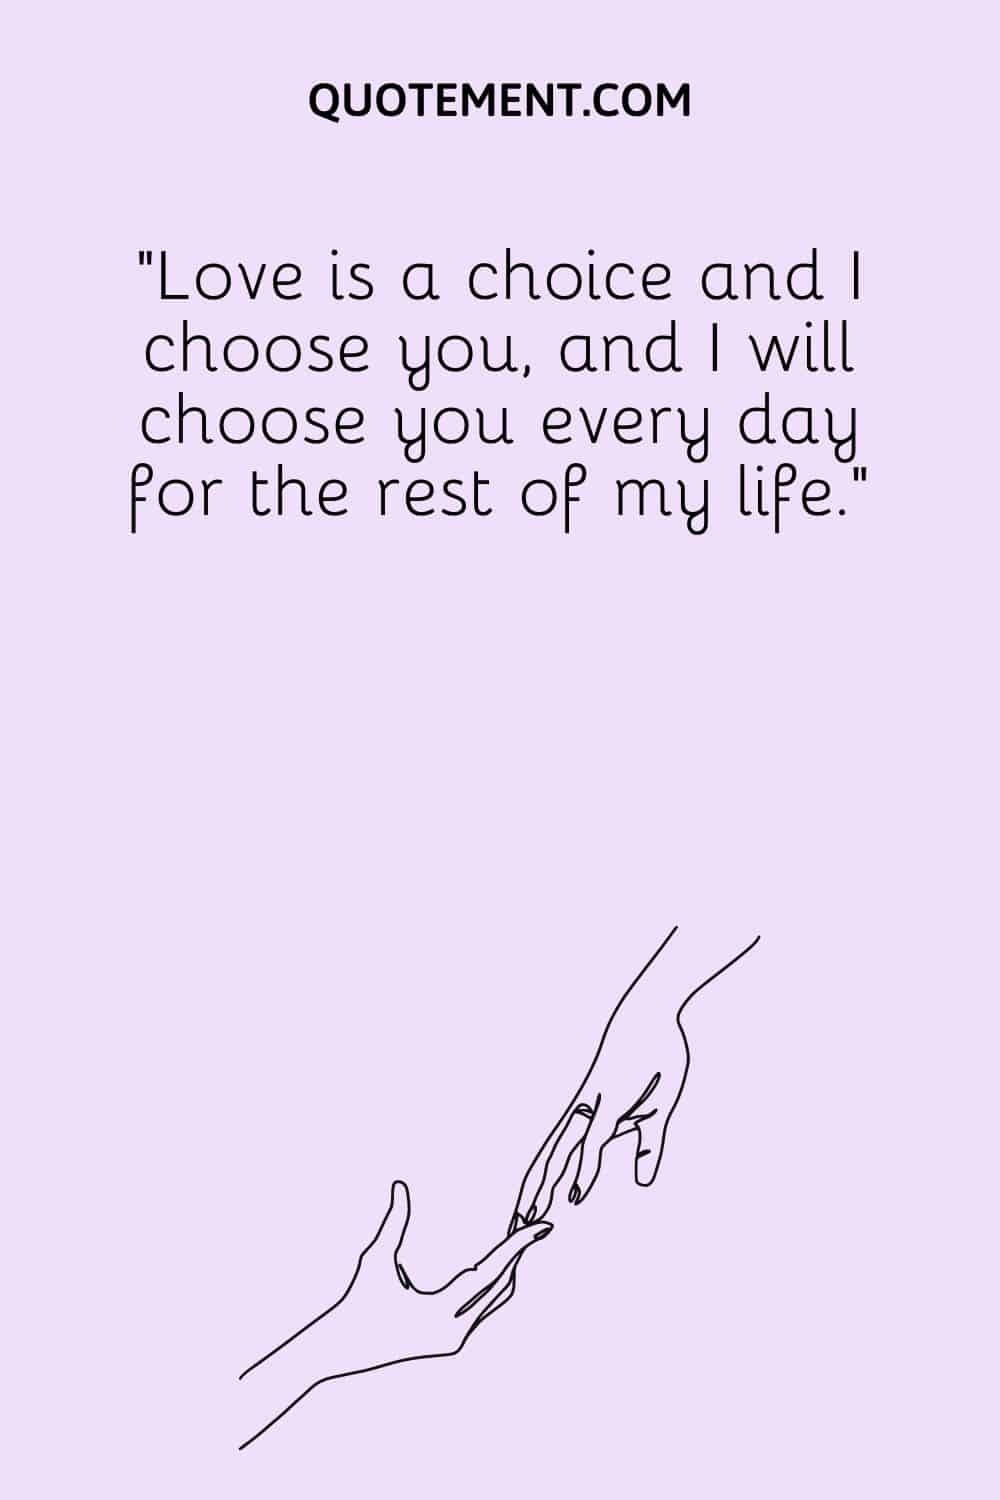 Love is a choice and I choose you, and I will choose you every day for the rest of my life